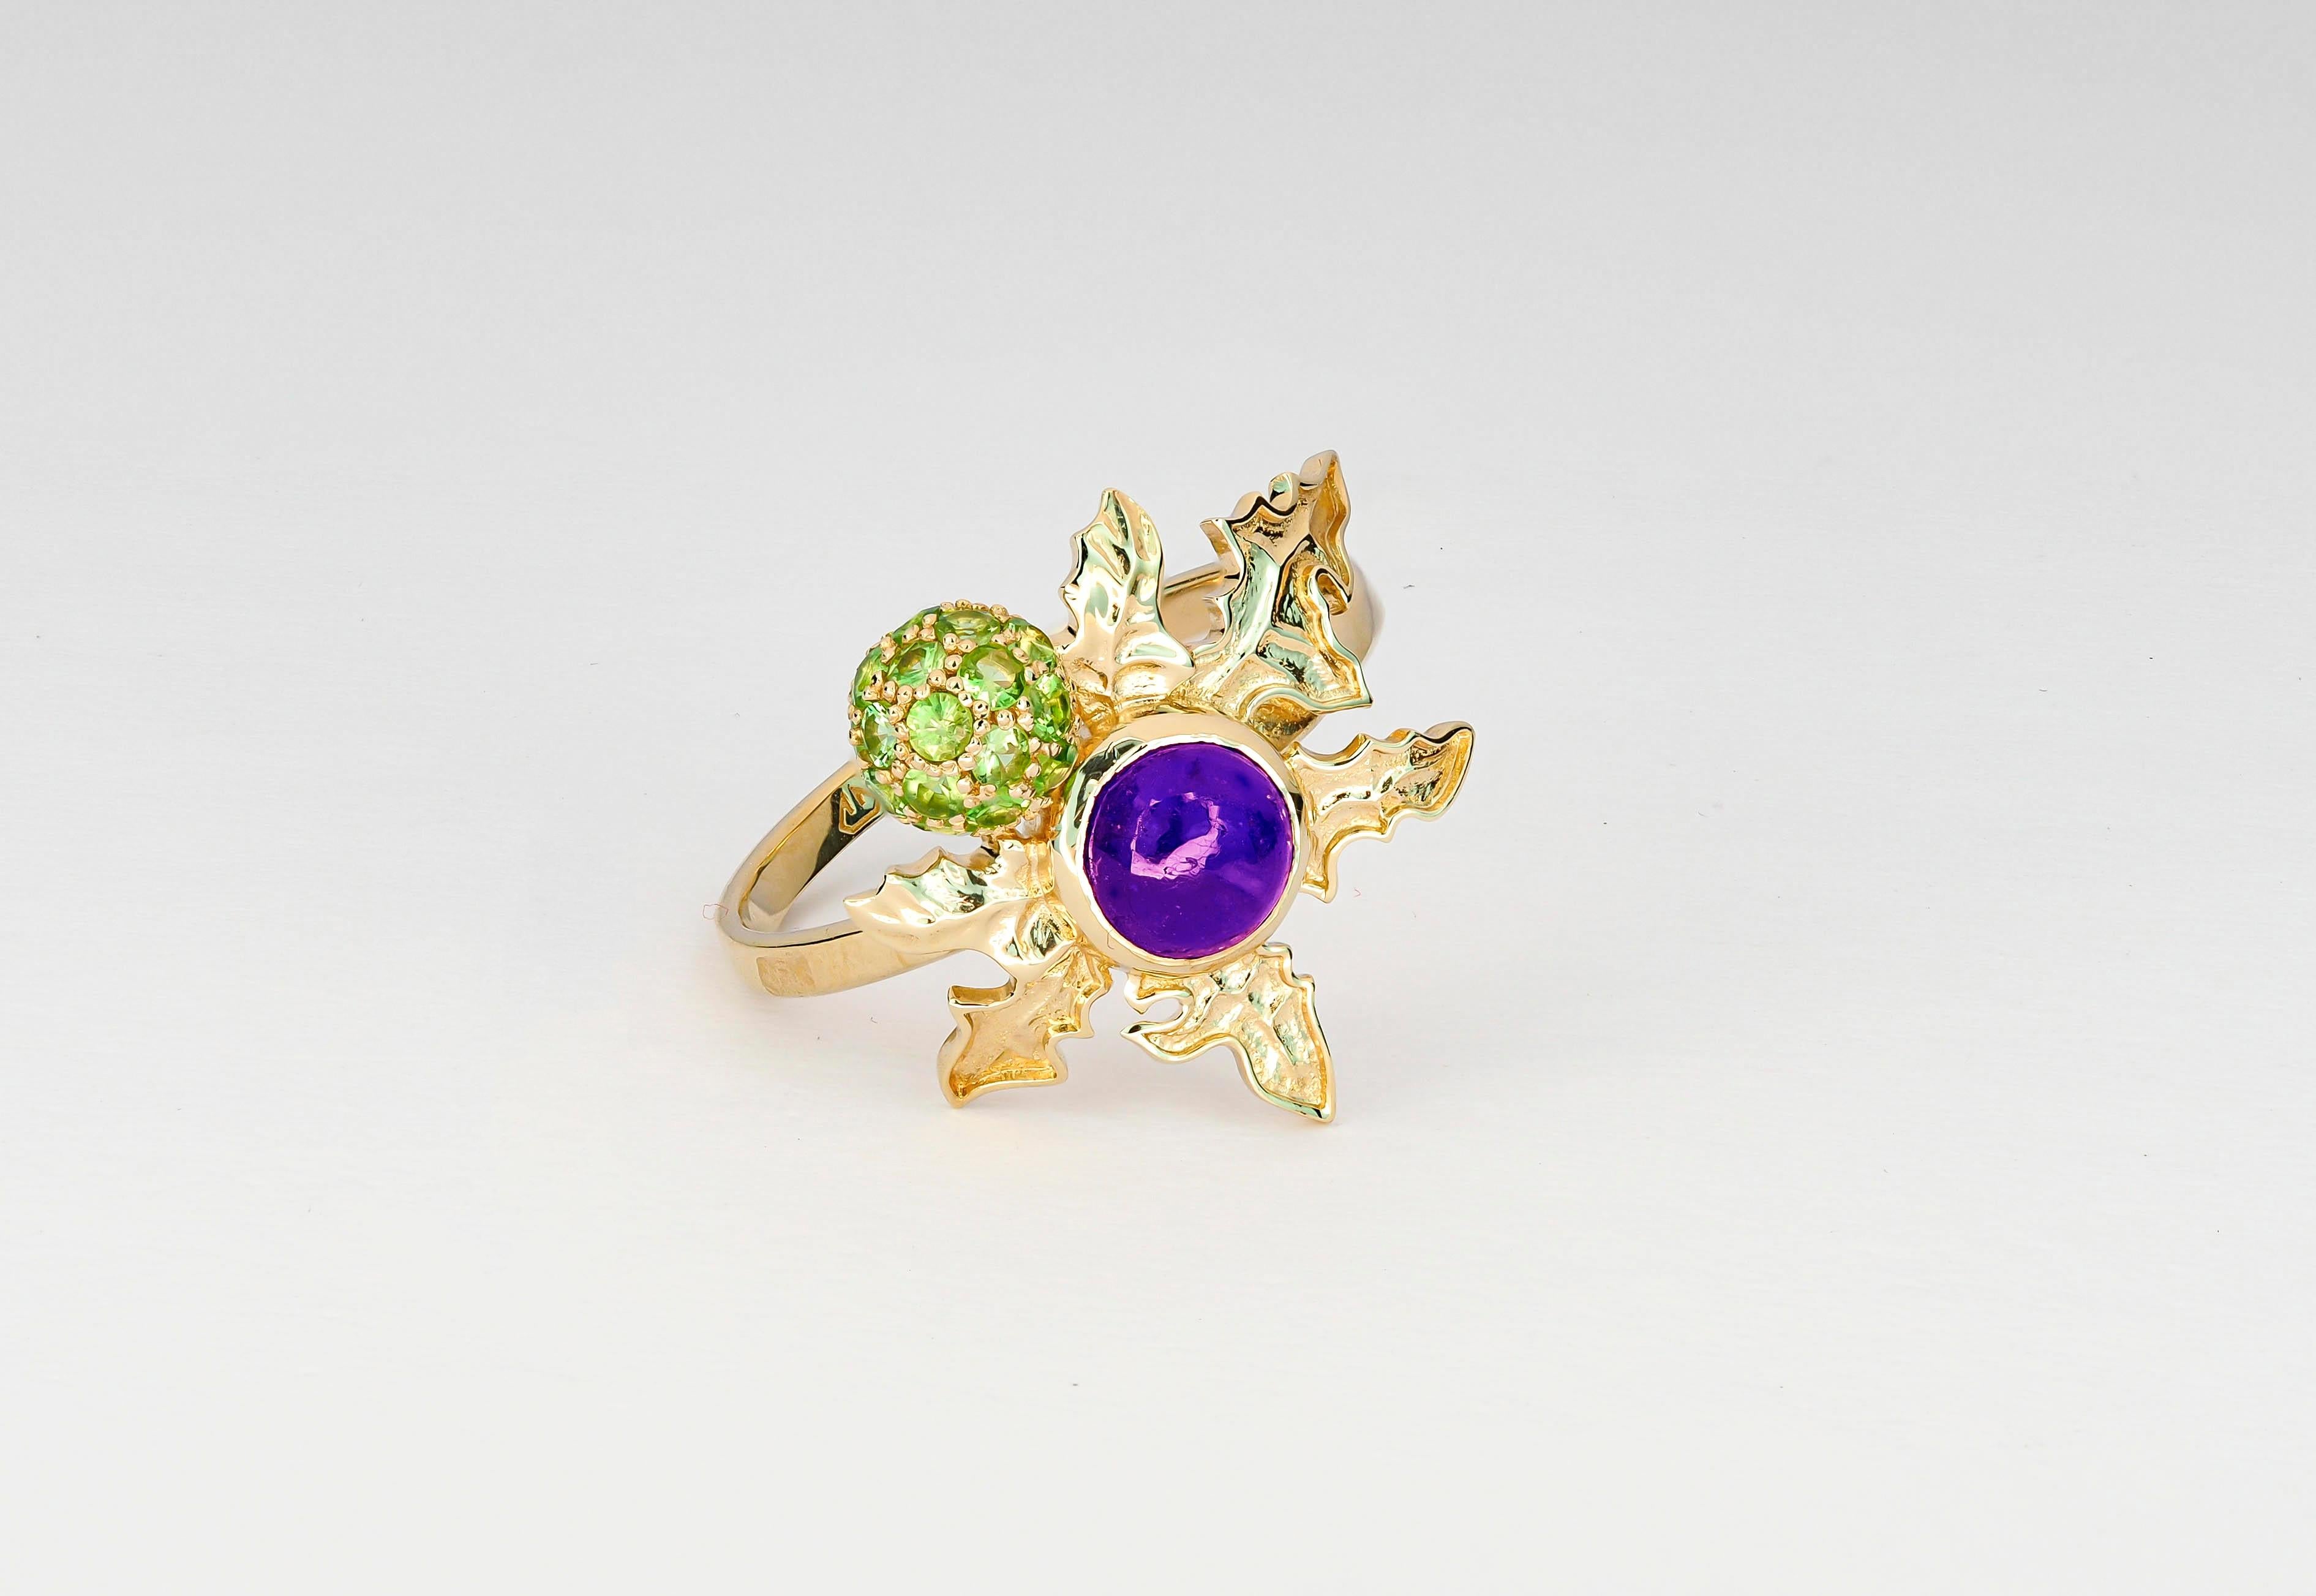 Modern 14 K Gold Scottish Thistle Ring with Amethyst and Peridots